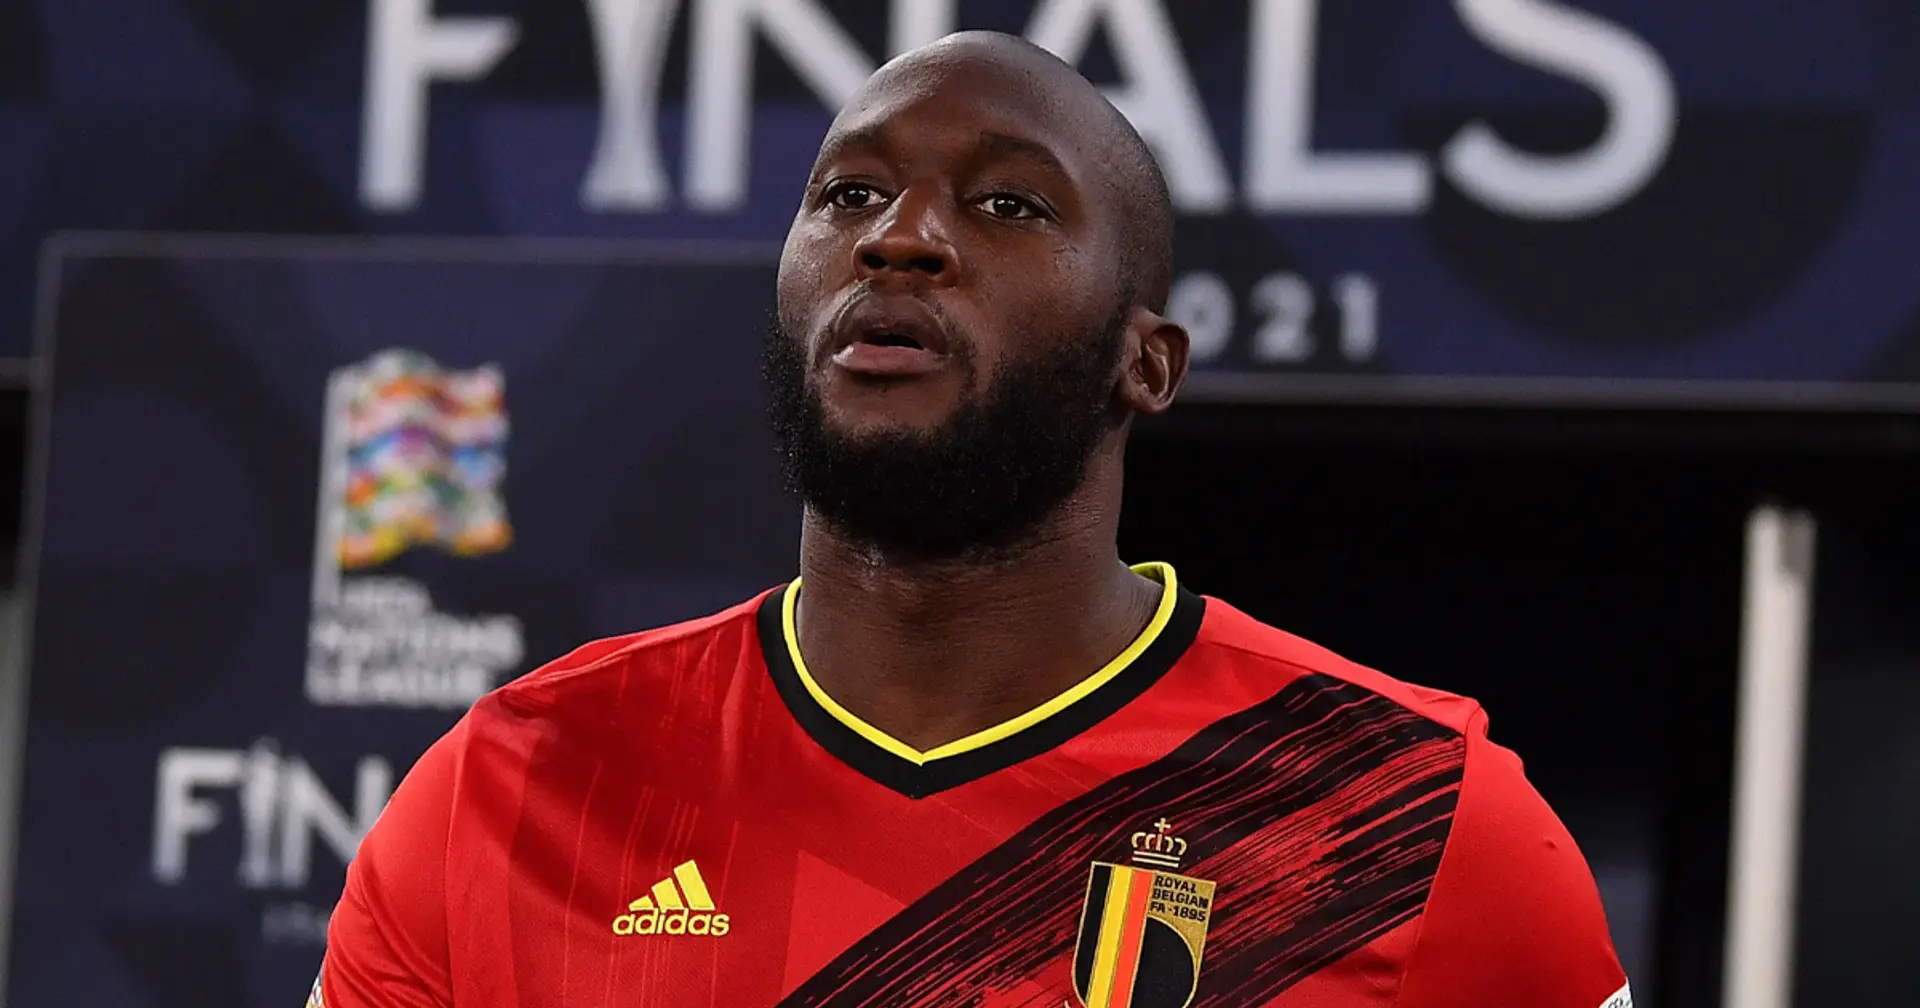 Romelu Lukaku withdraws from Belgium squad due to 'muscle overload'